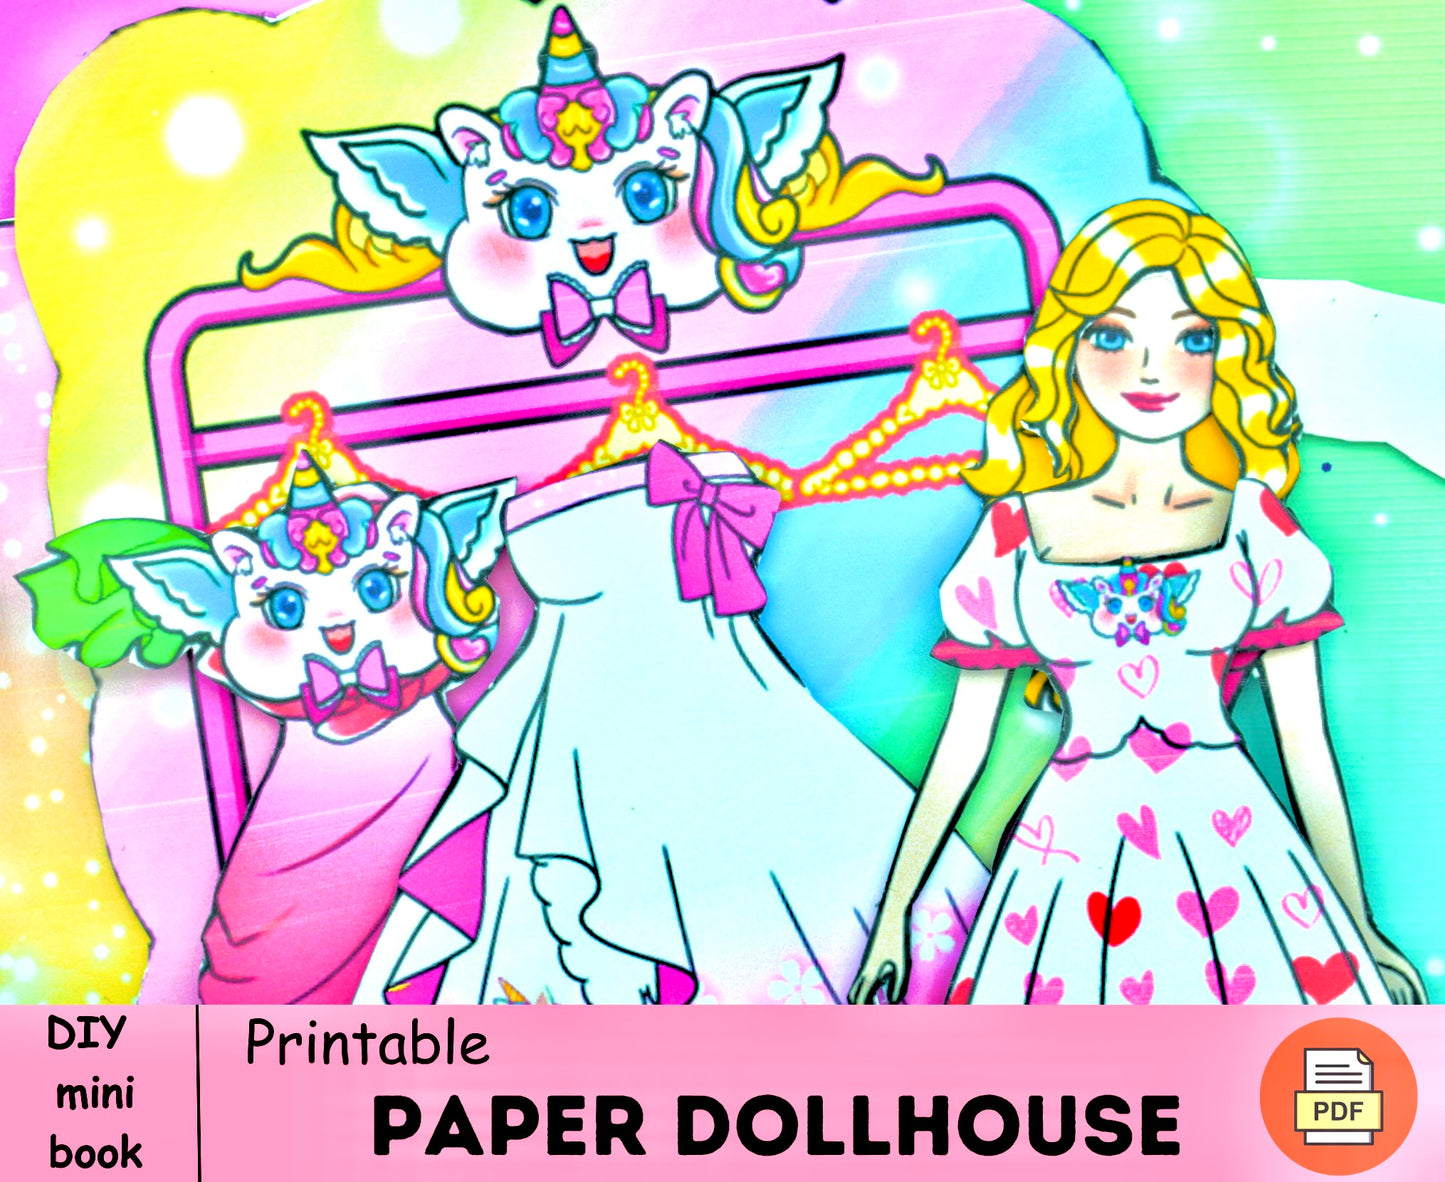 Magic unicorn bag for Barbie doll paper printables 🌈Colorful activity book printable for kids | Handmade craft bag print | Dress paper doll 🌈 Woa Doll Crafts